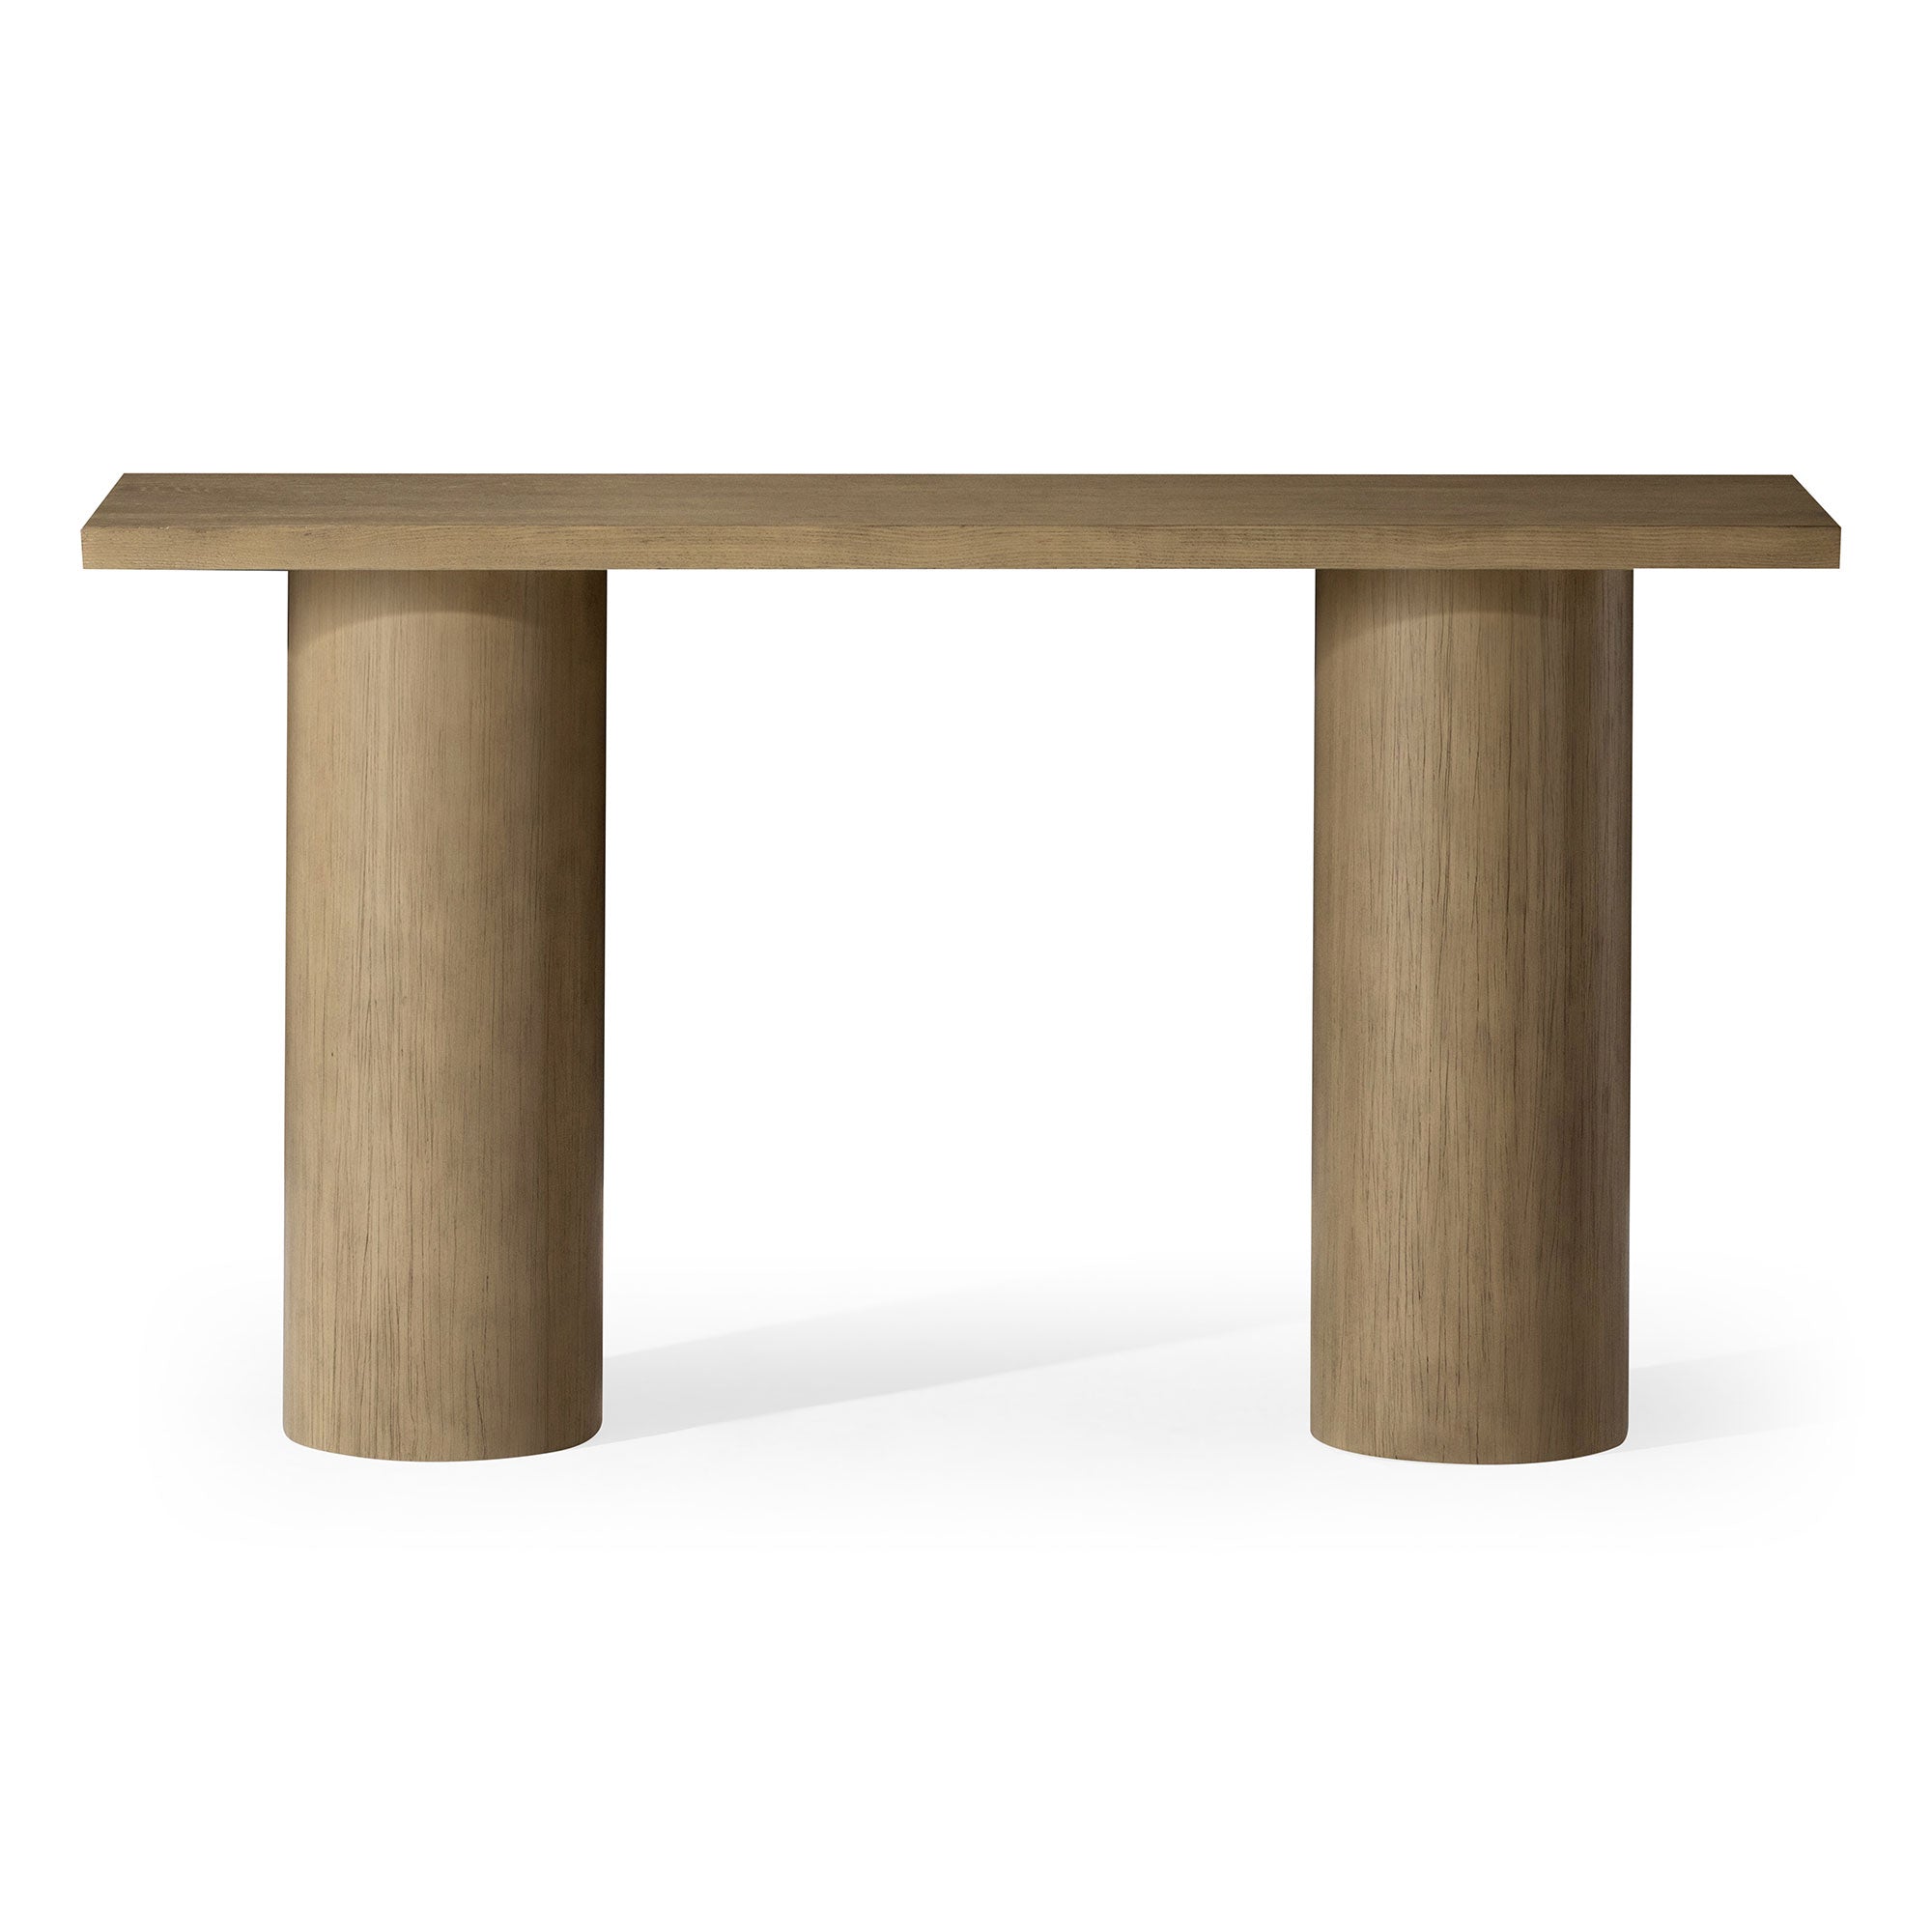 Lana Contemporary Wooden Console Table in Refined Grey Finish